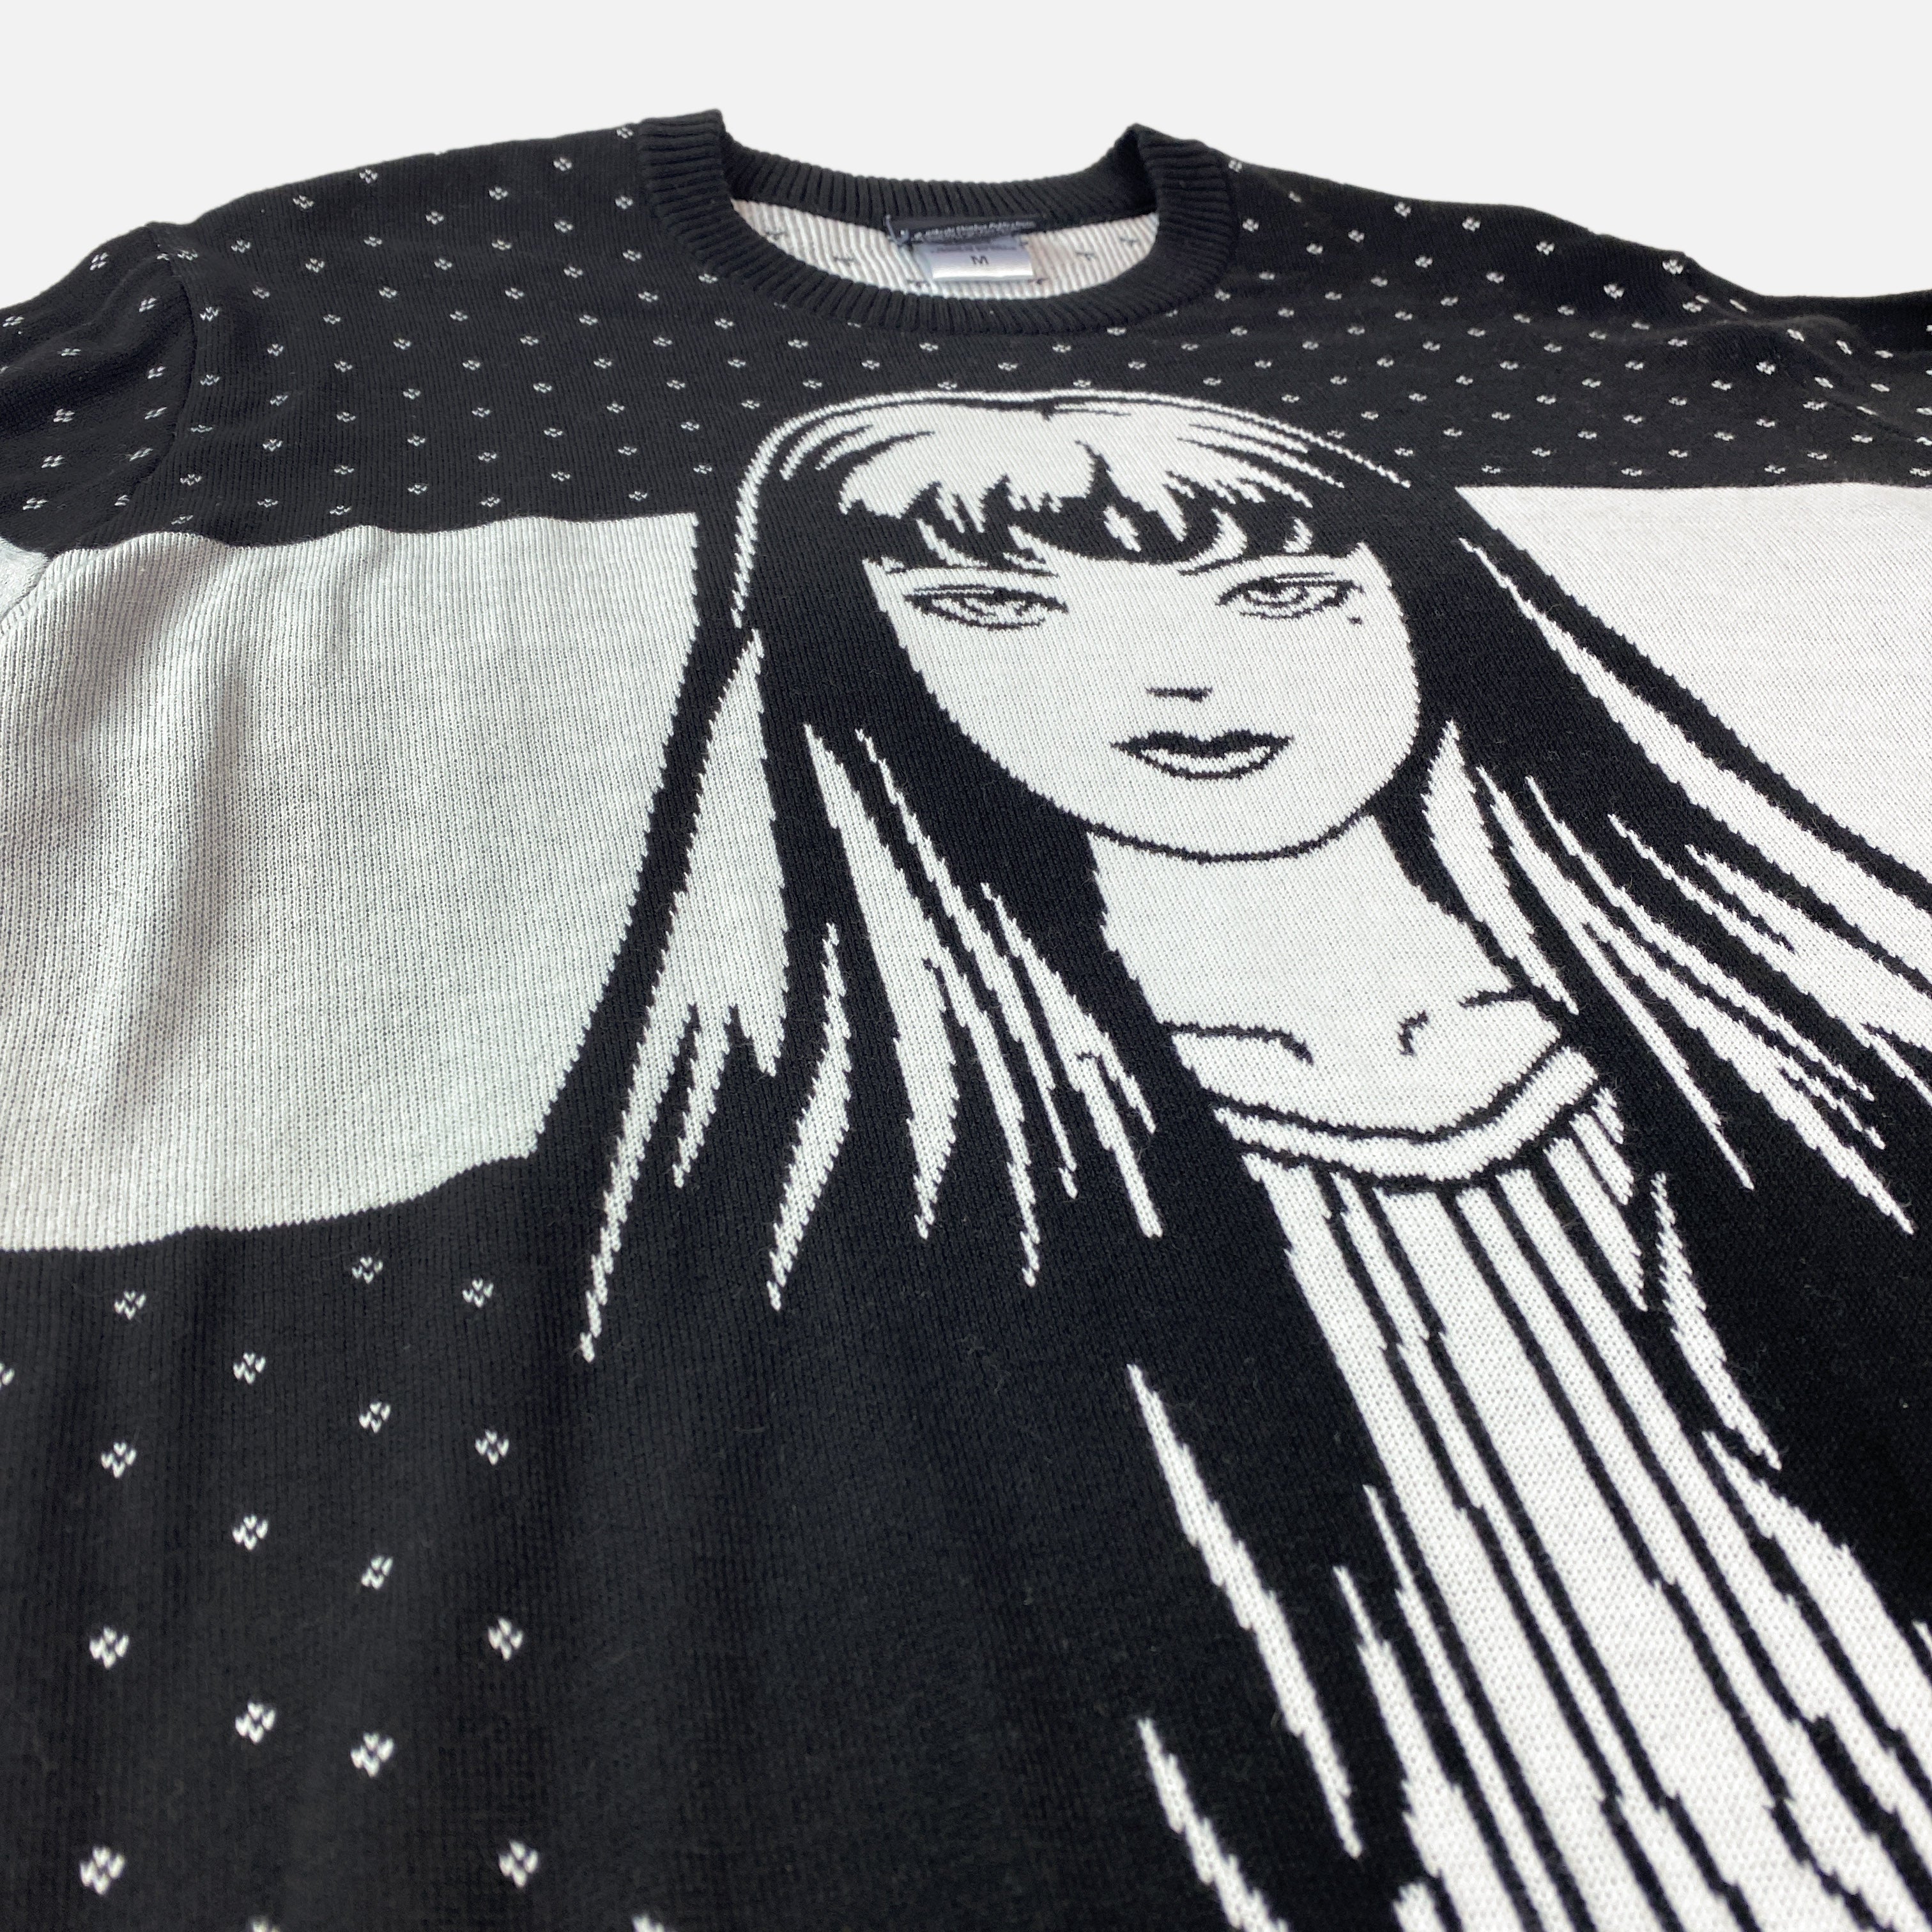 Junji Ito - Tomie Holiday Sweater - Crunchyroll Exclusive! image count 2